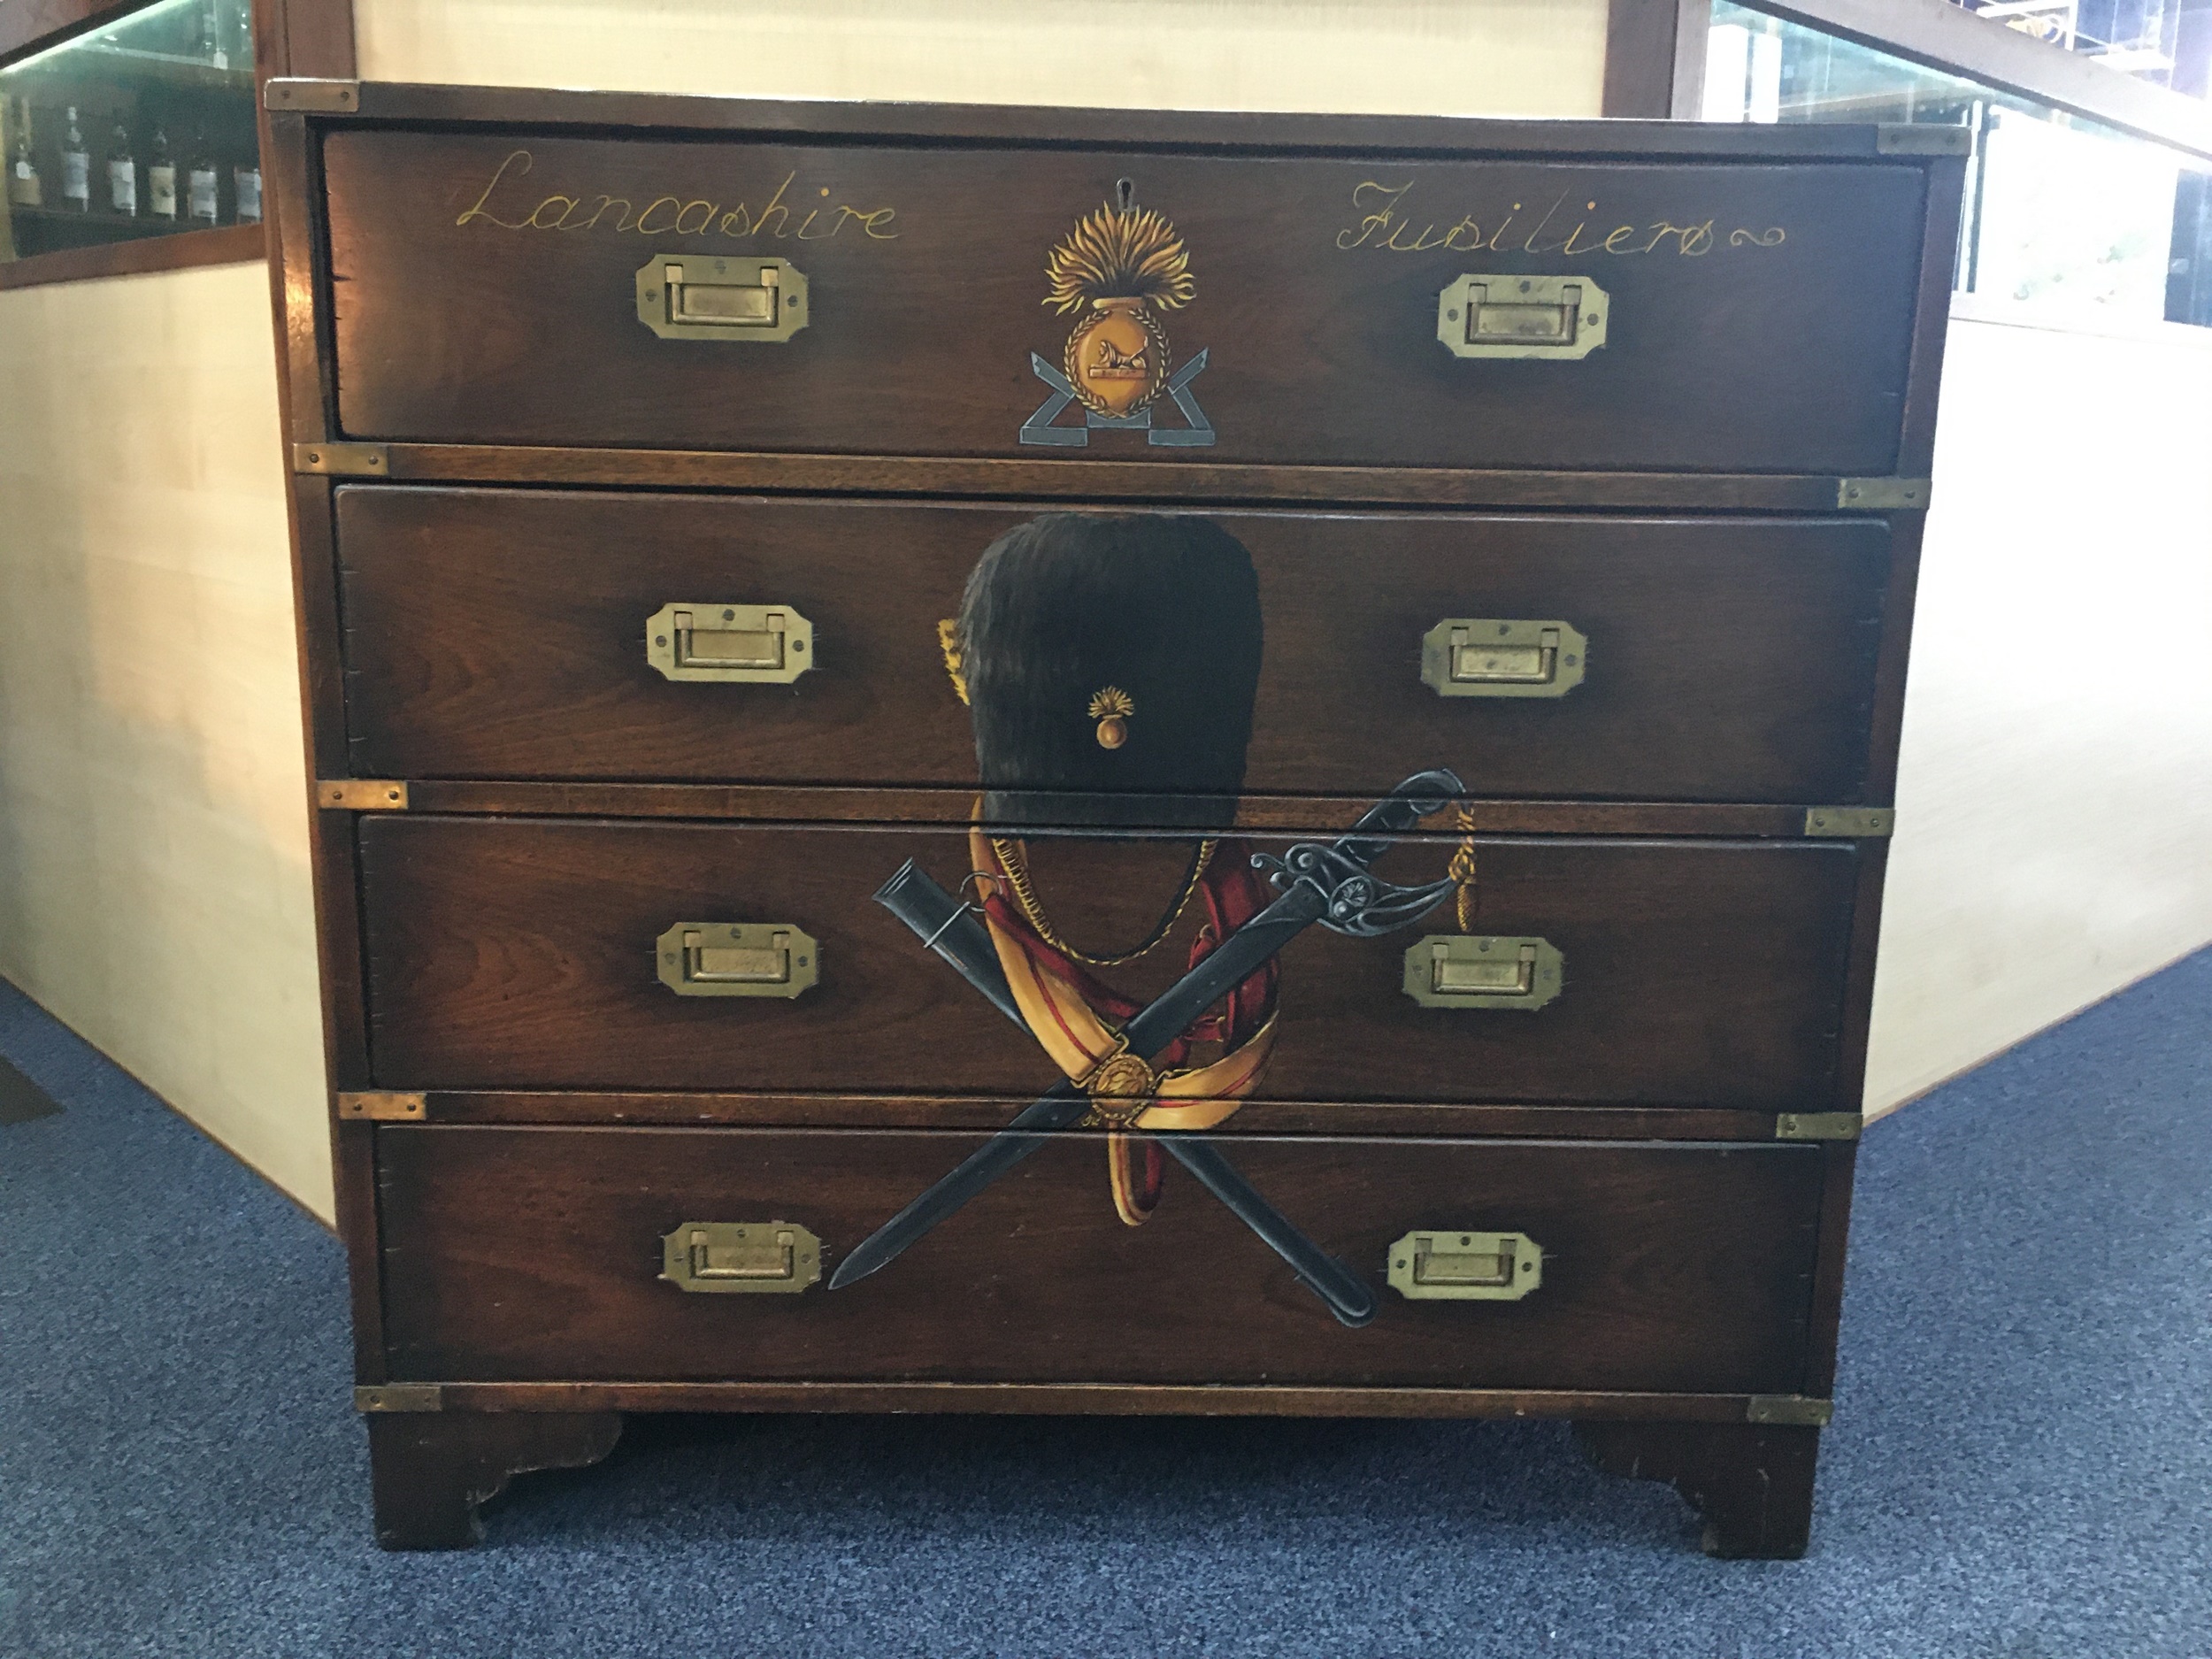 A REPRODUCTION MAHOGANY CAMPAIGN CHEST